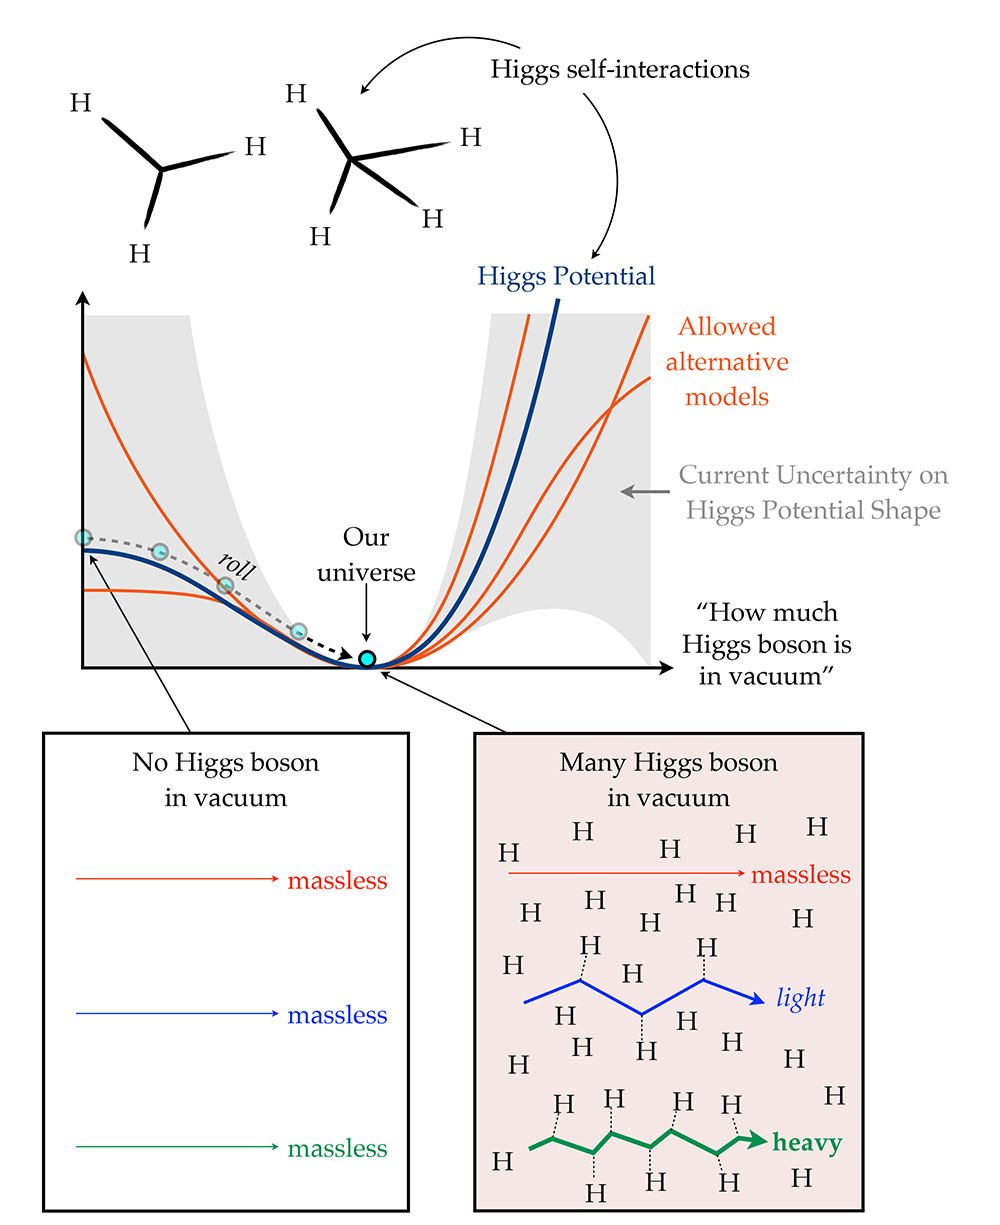 Diagram related to Higgs potential.